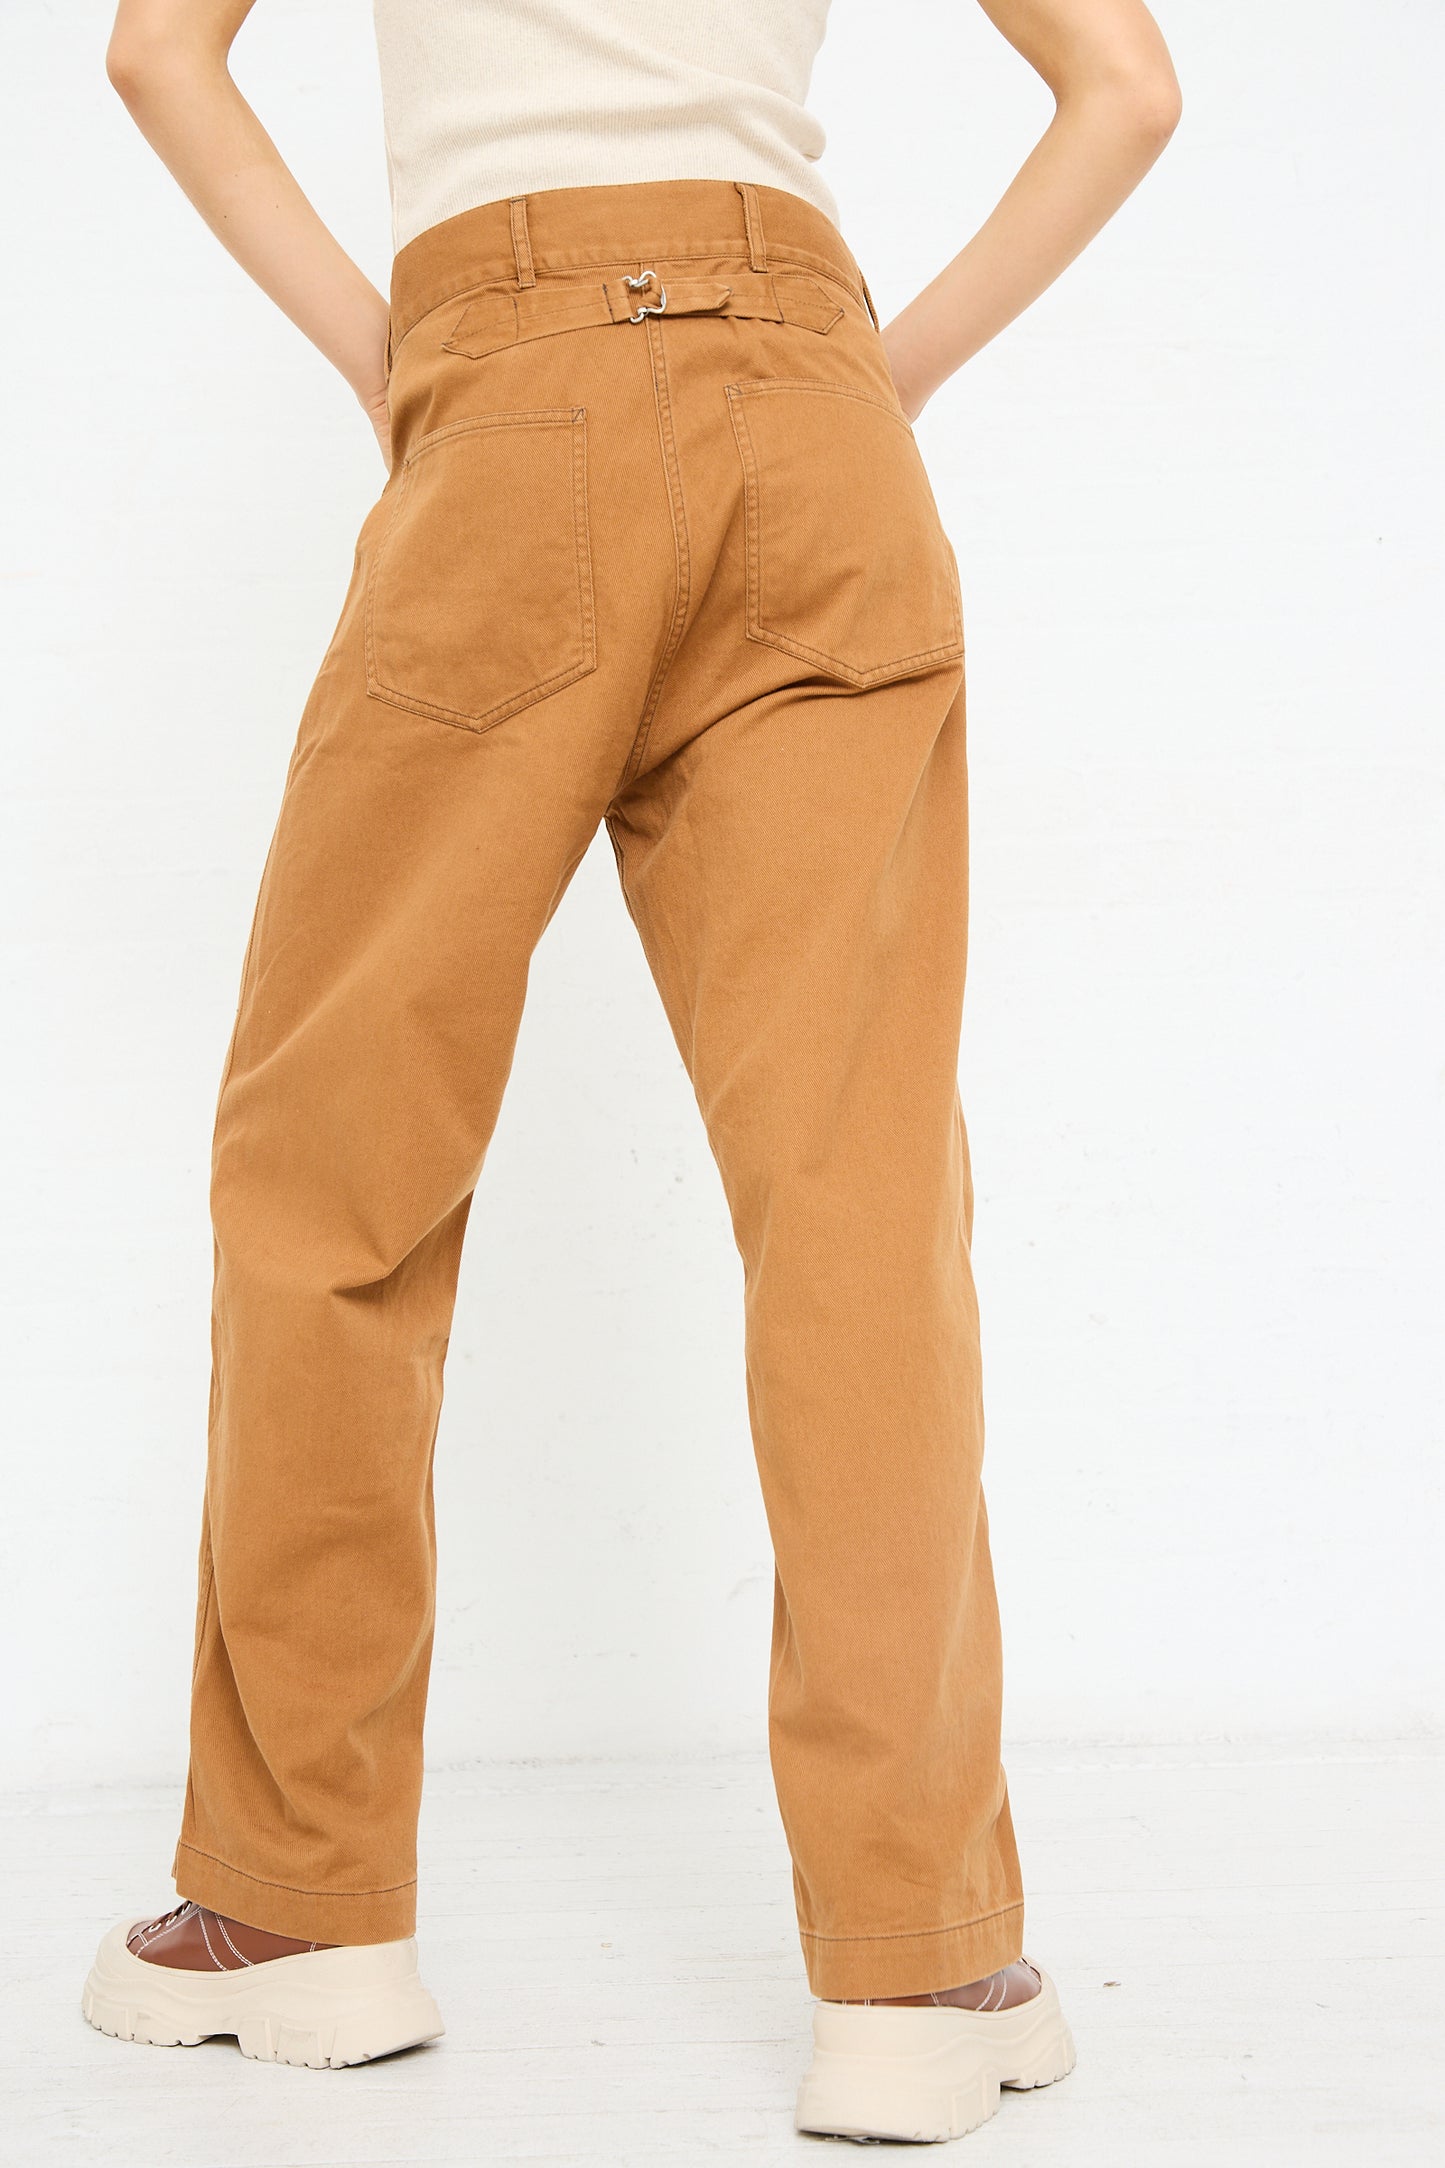 Rear view of a person wearing brown Chimala Classic Drill US Army Work Trouser in Camel standing with hands on hips.